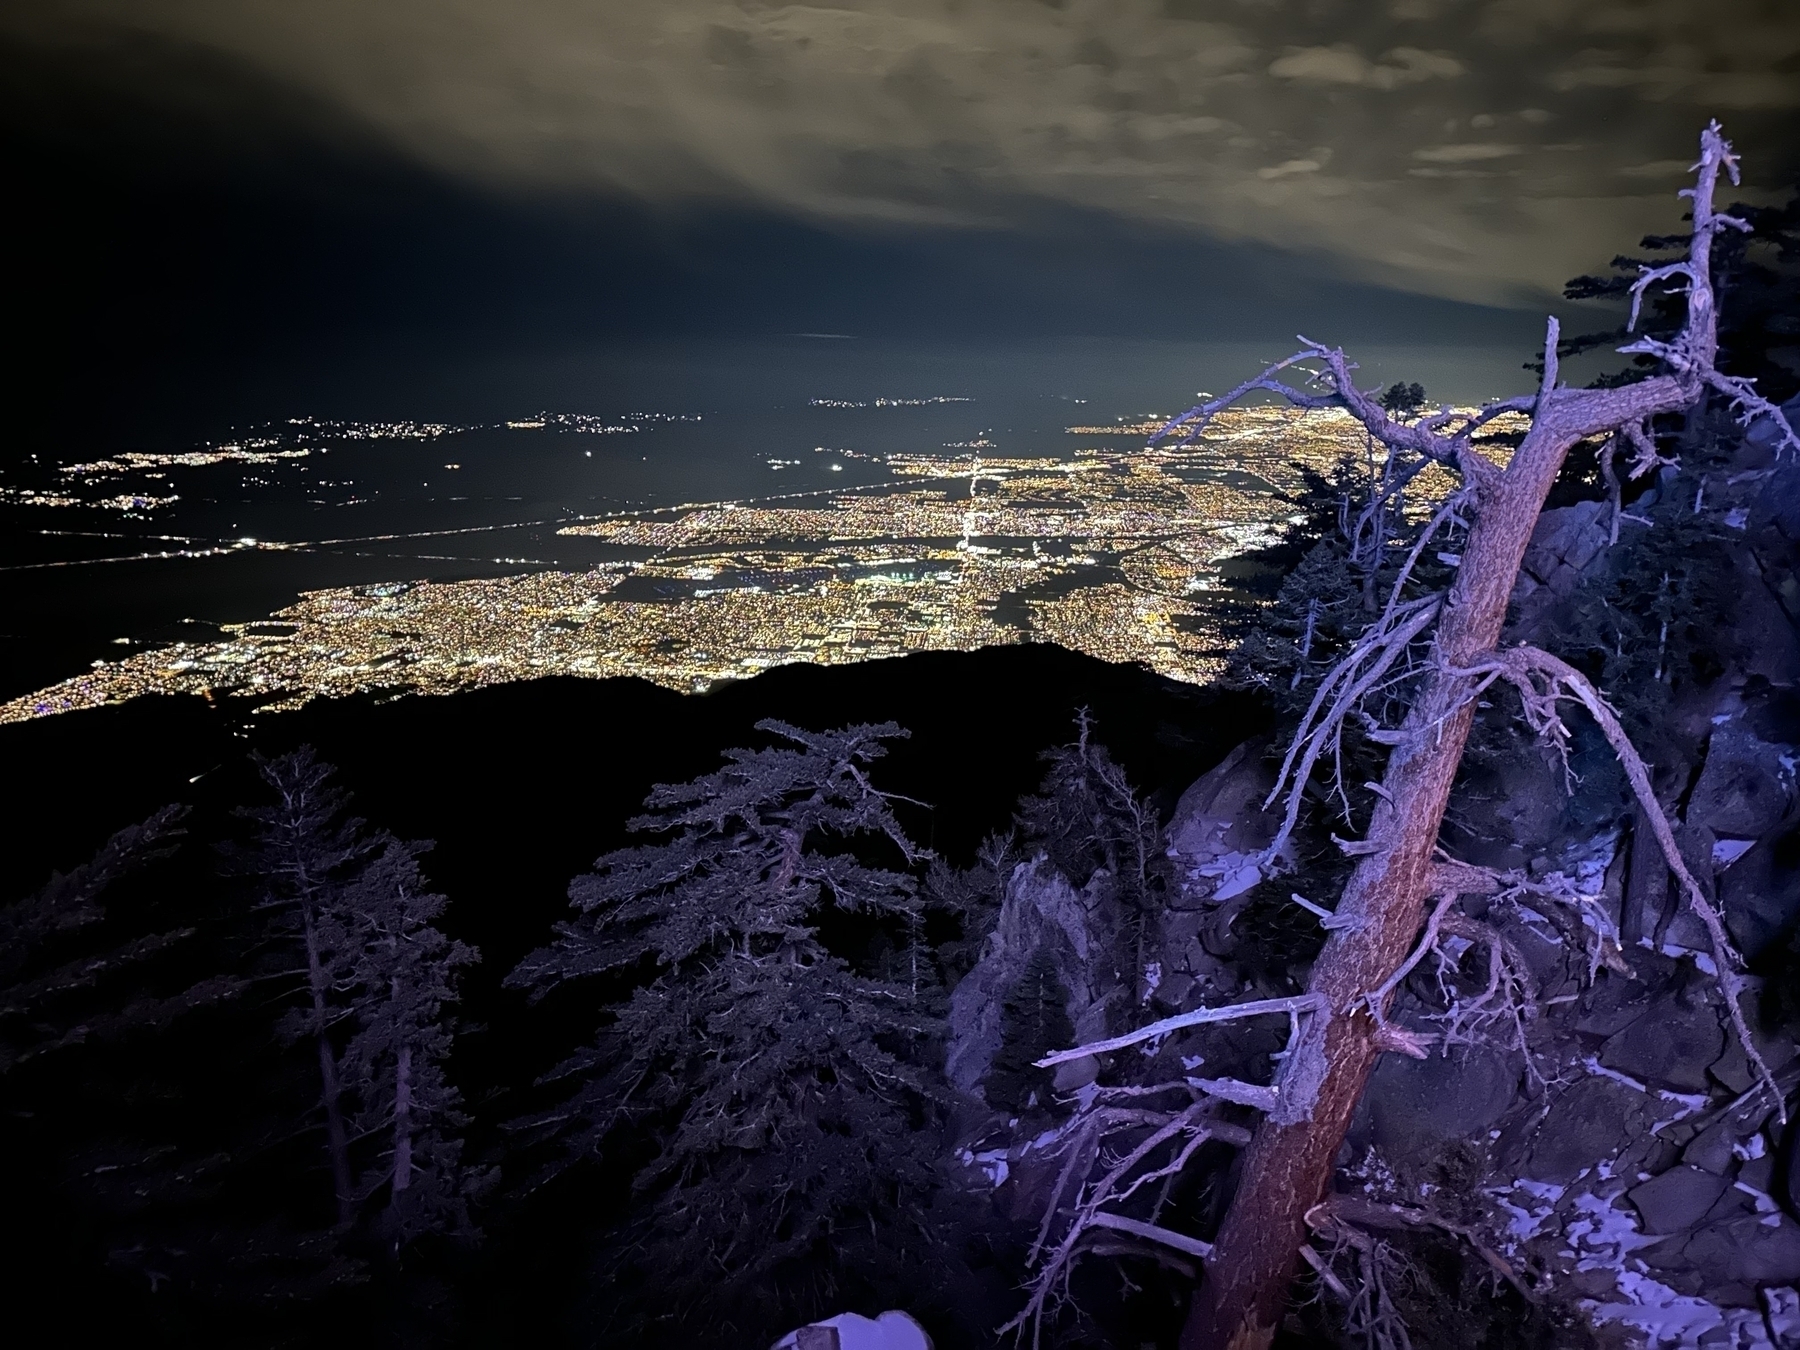 A view of Palm Springs at night from the tramway restaurant on Mt. San Jacinto.